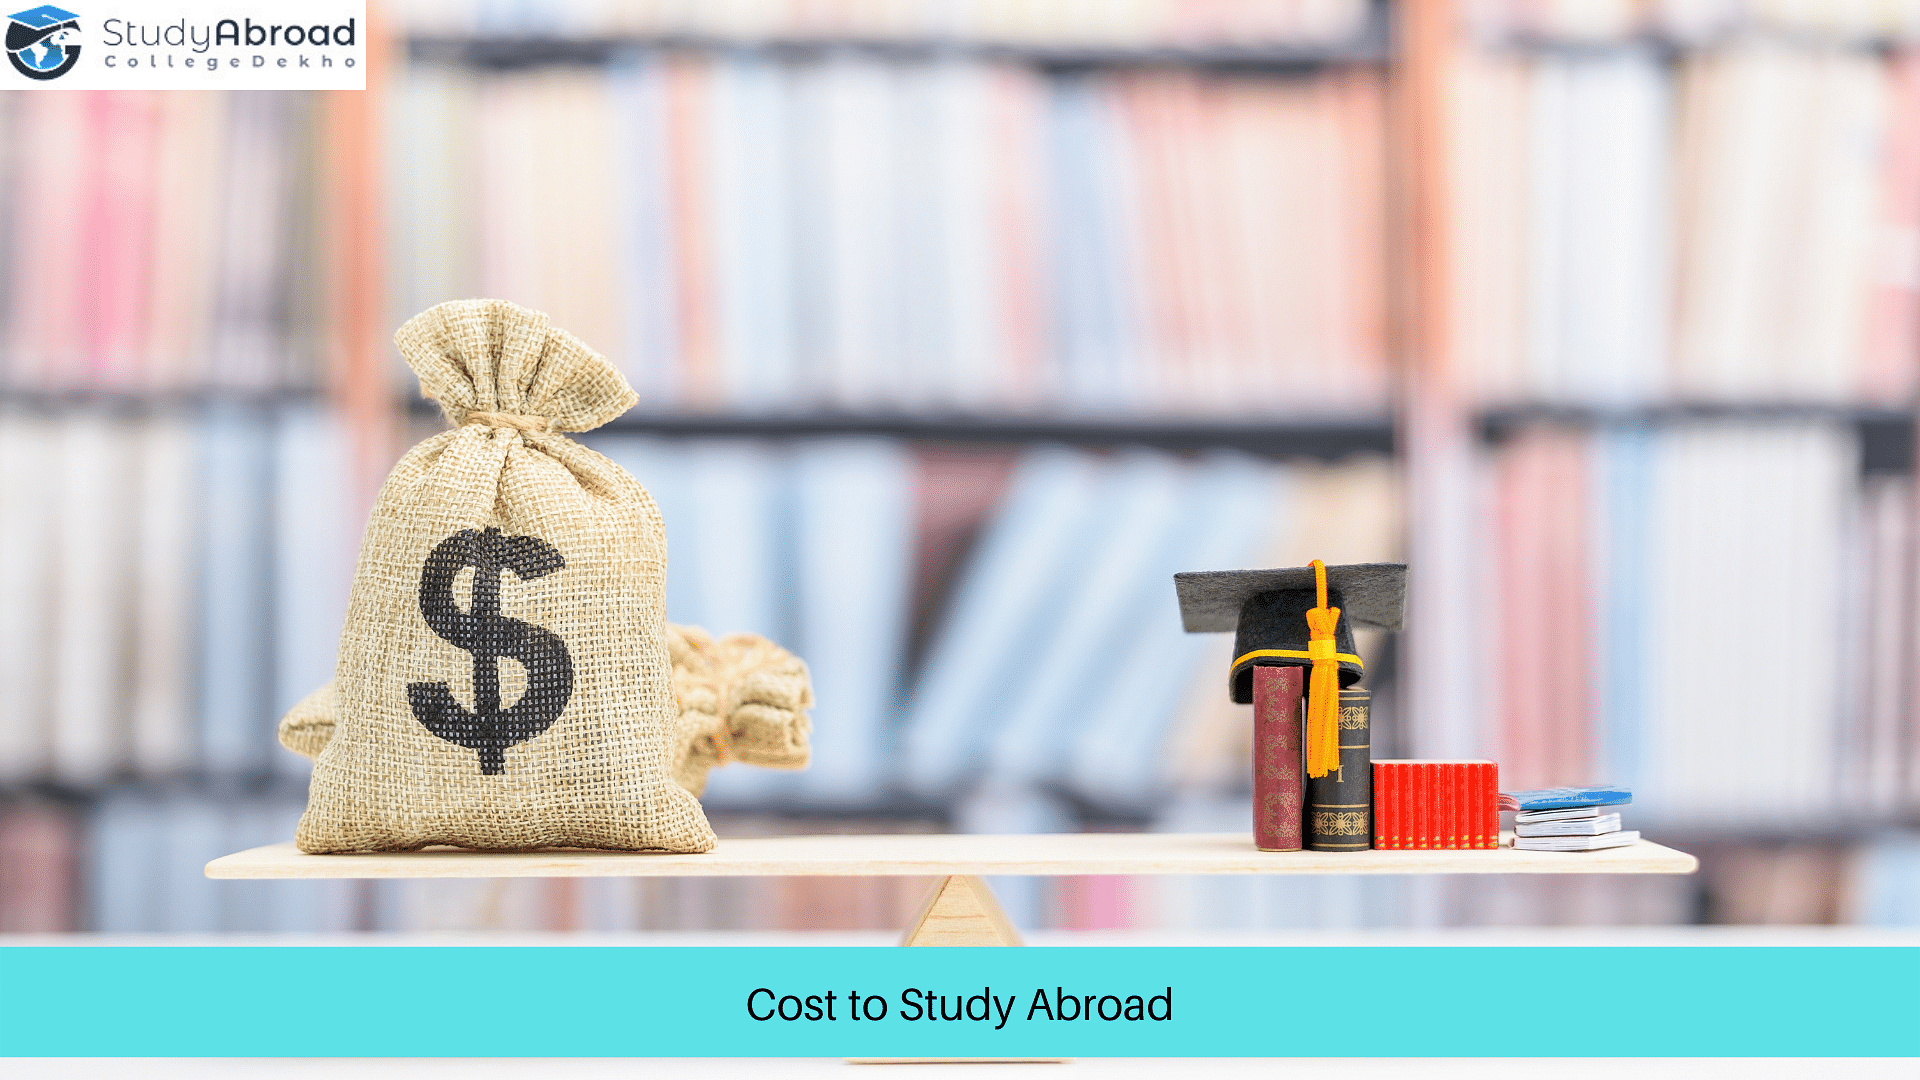 Studying Abroad Costlier